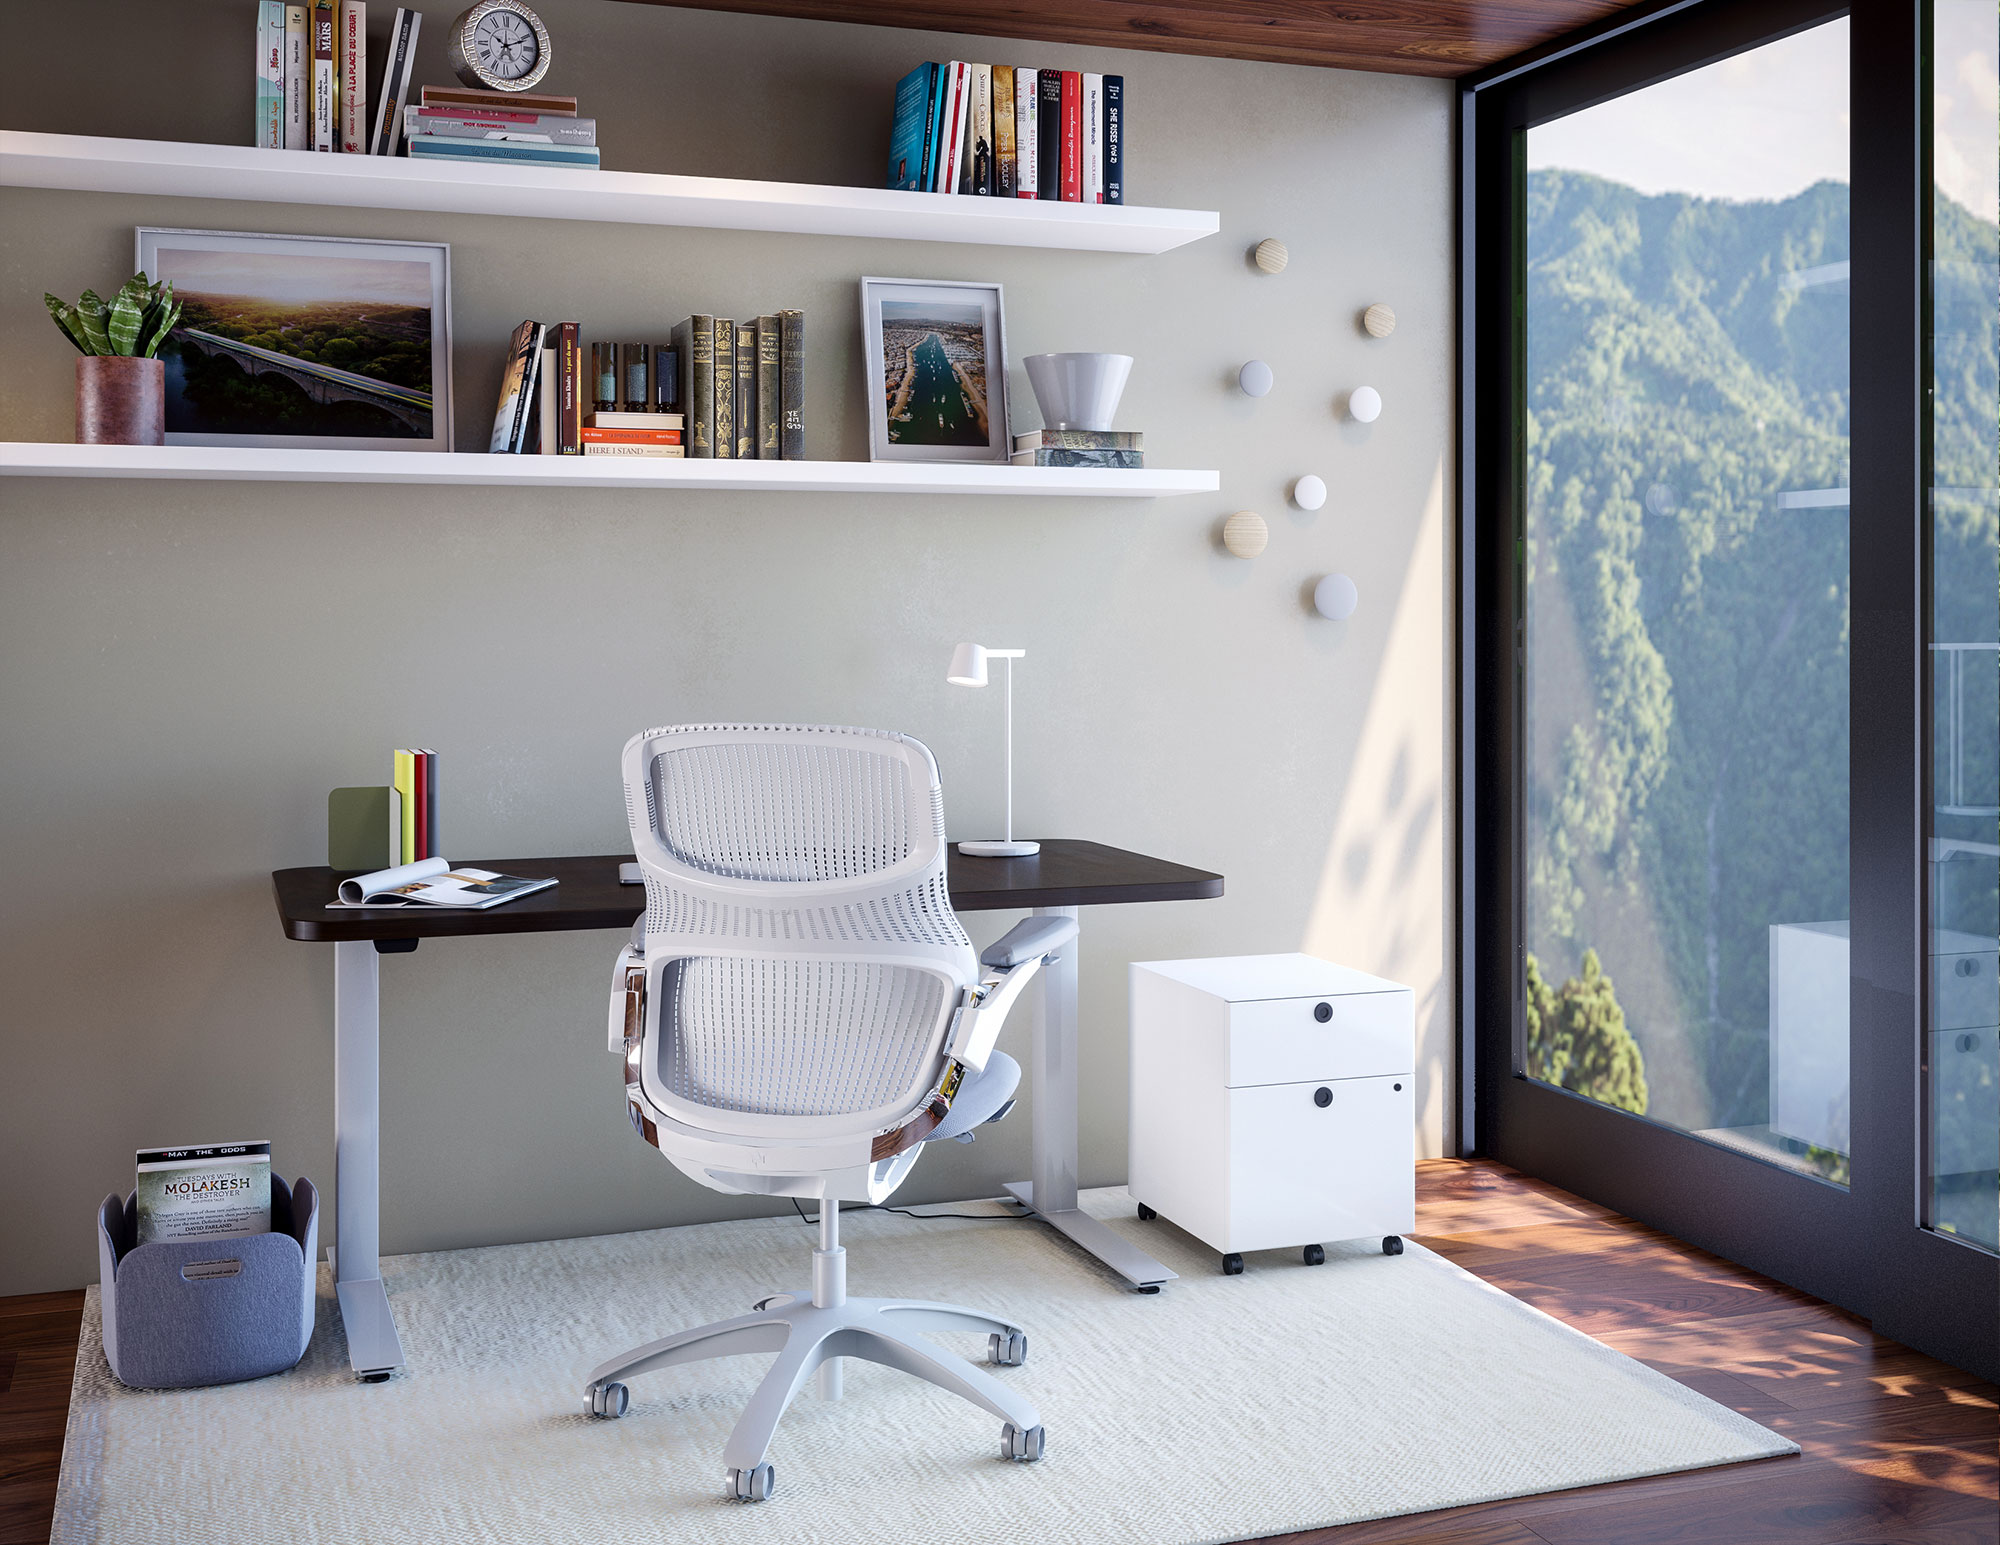 Hipso Height-Adjustable Desk with Generation by Knoll and Muuto accessrories. Work from Home Inspiration from Knoll and Muuto